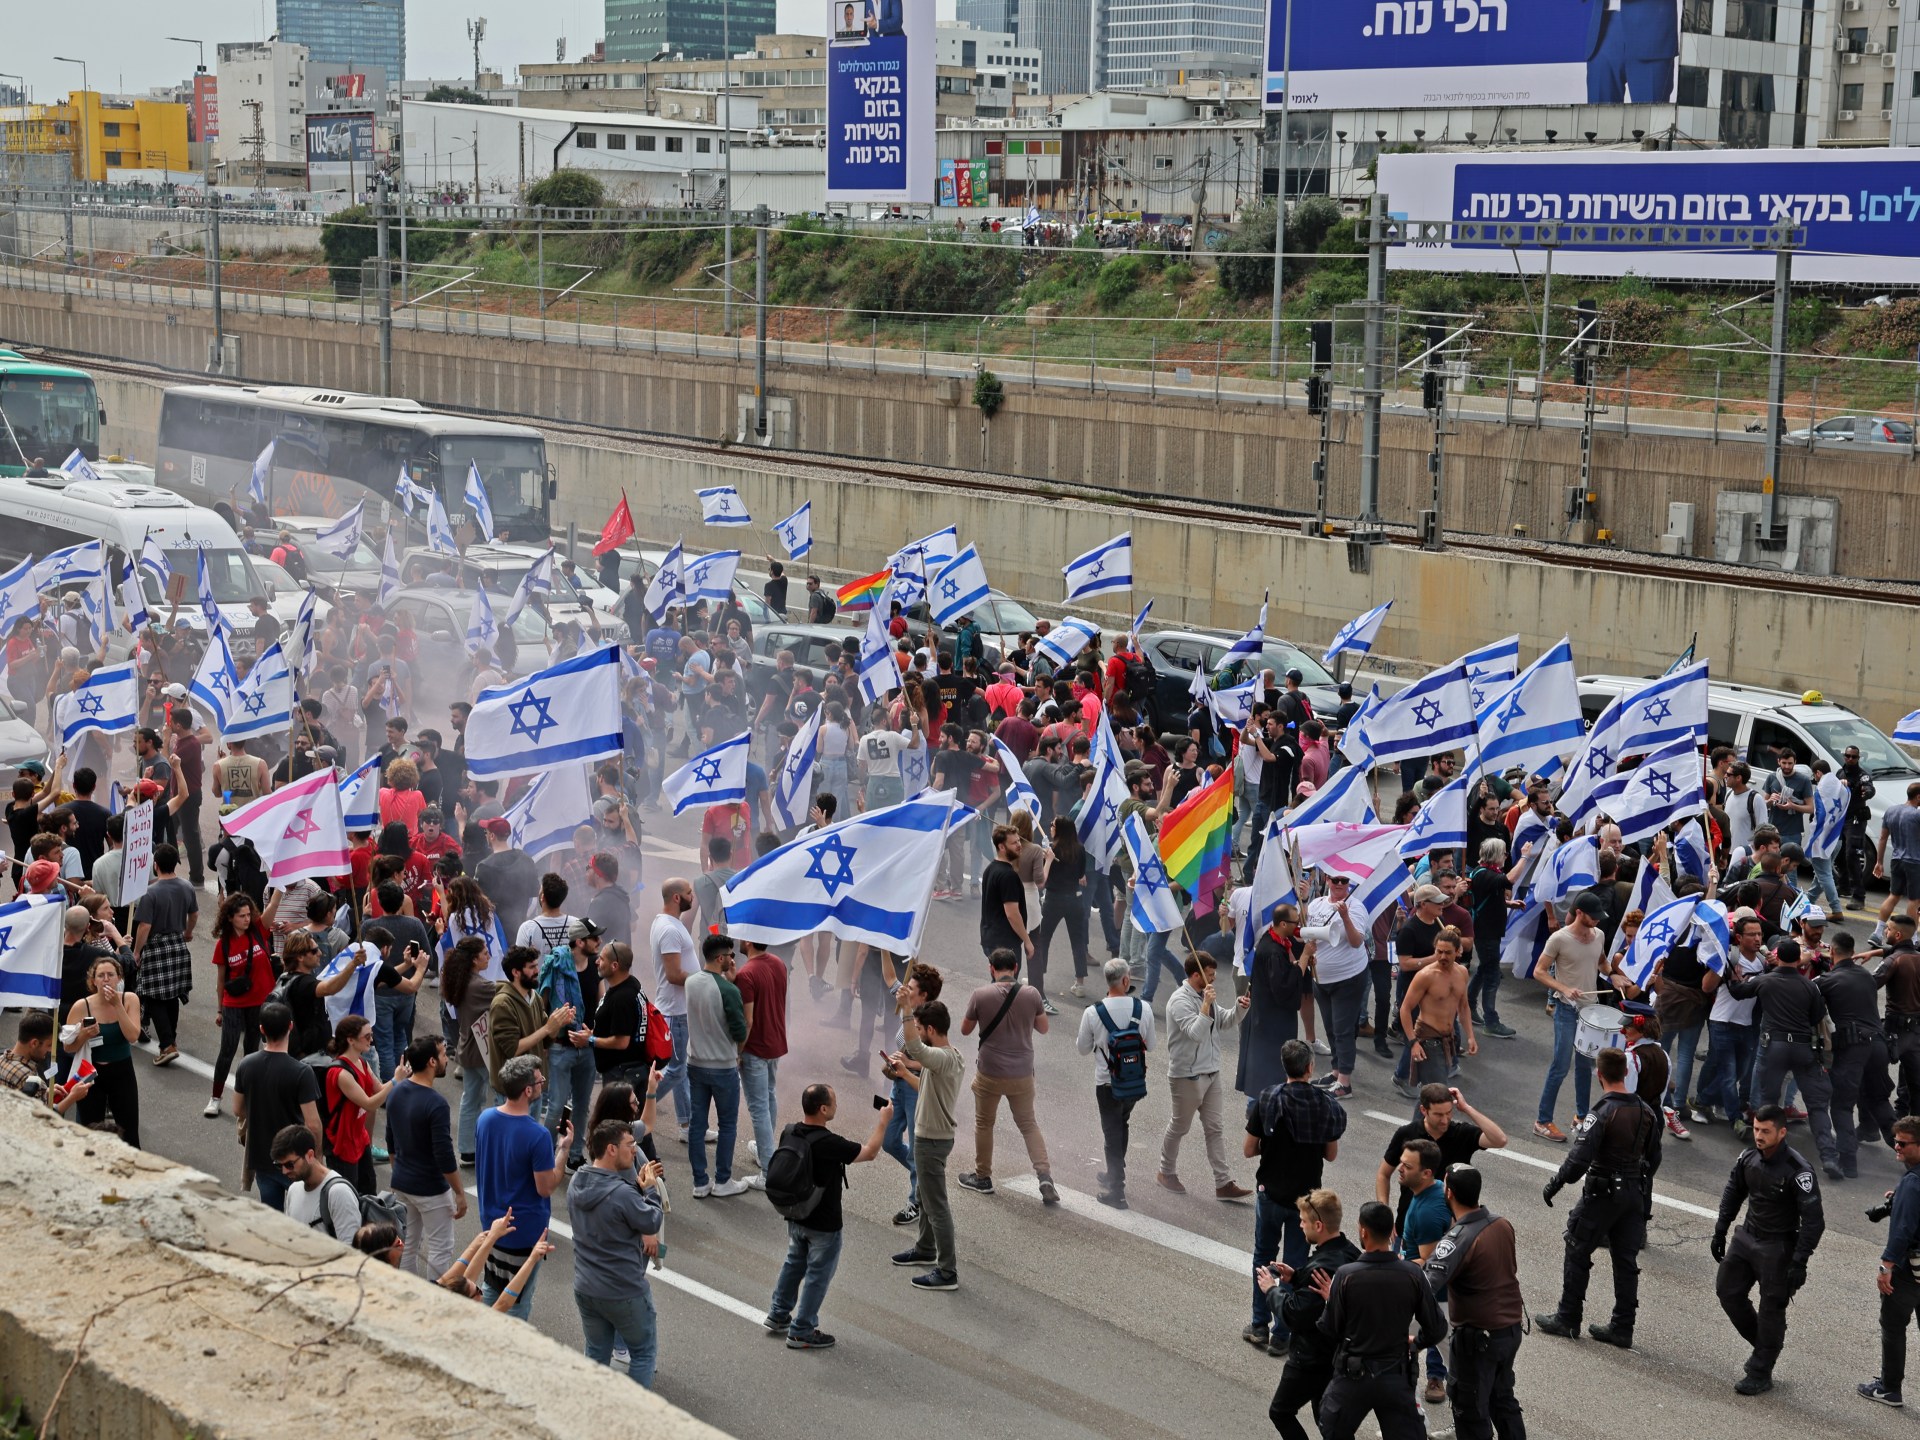 Israelis block streets in anti-government ‘Day of Shutdown’ | Information